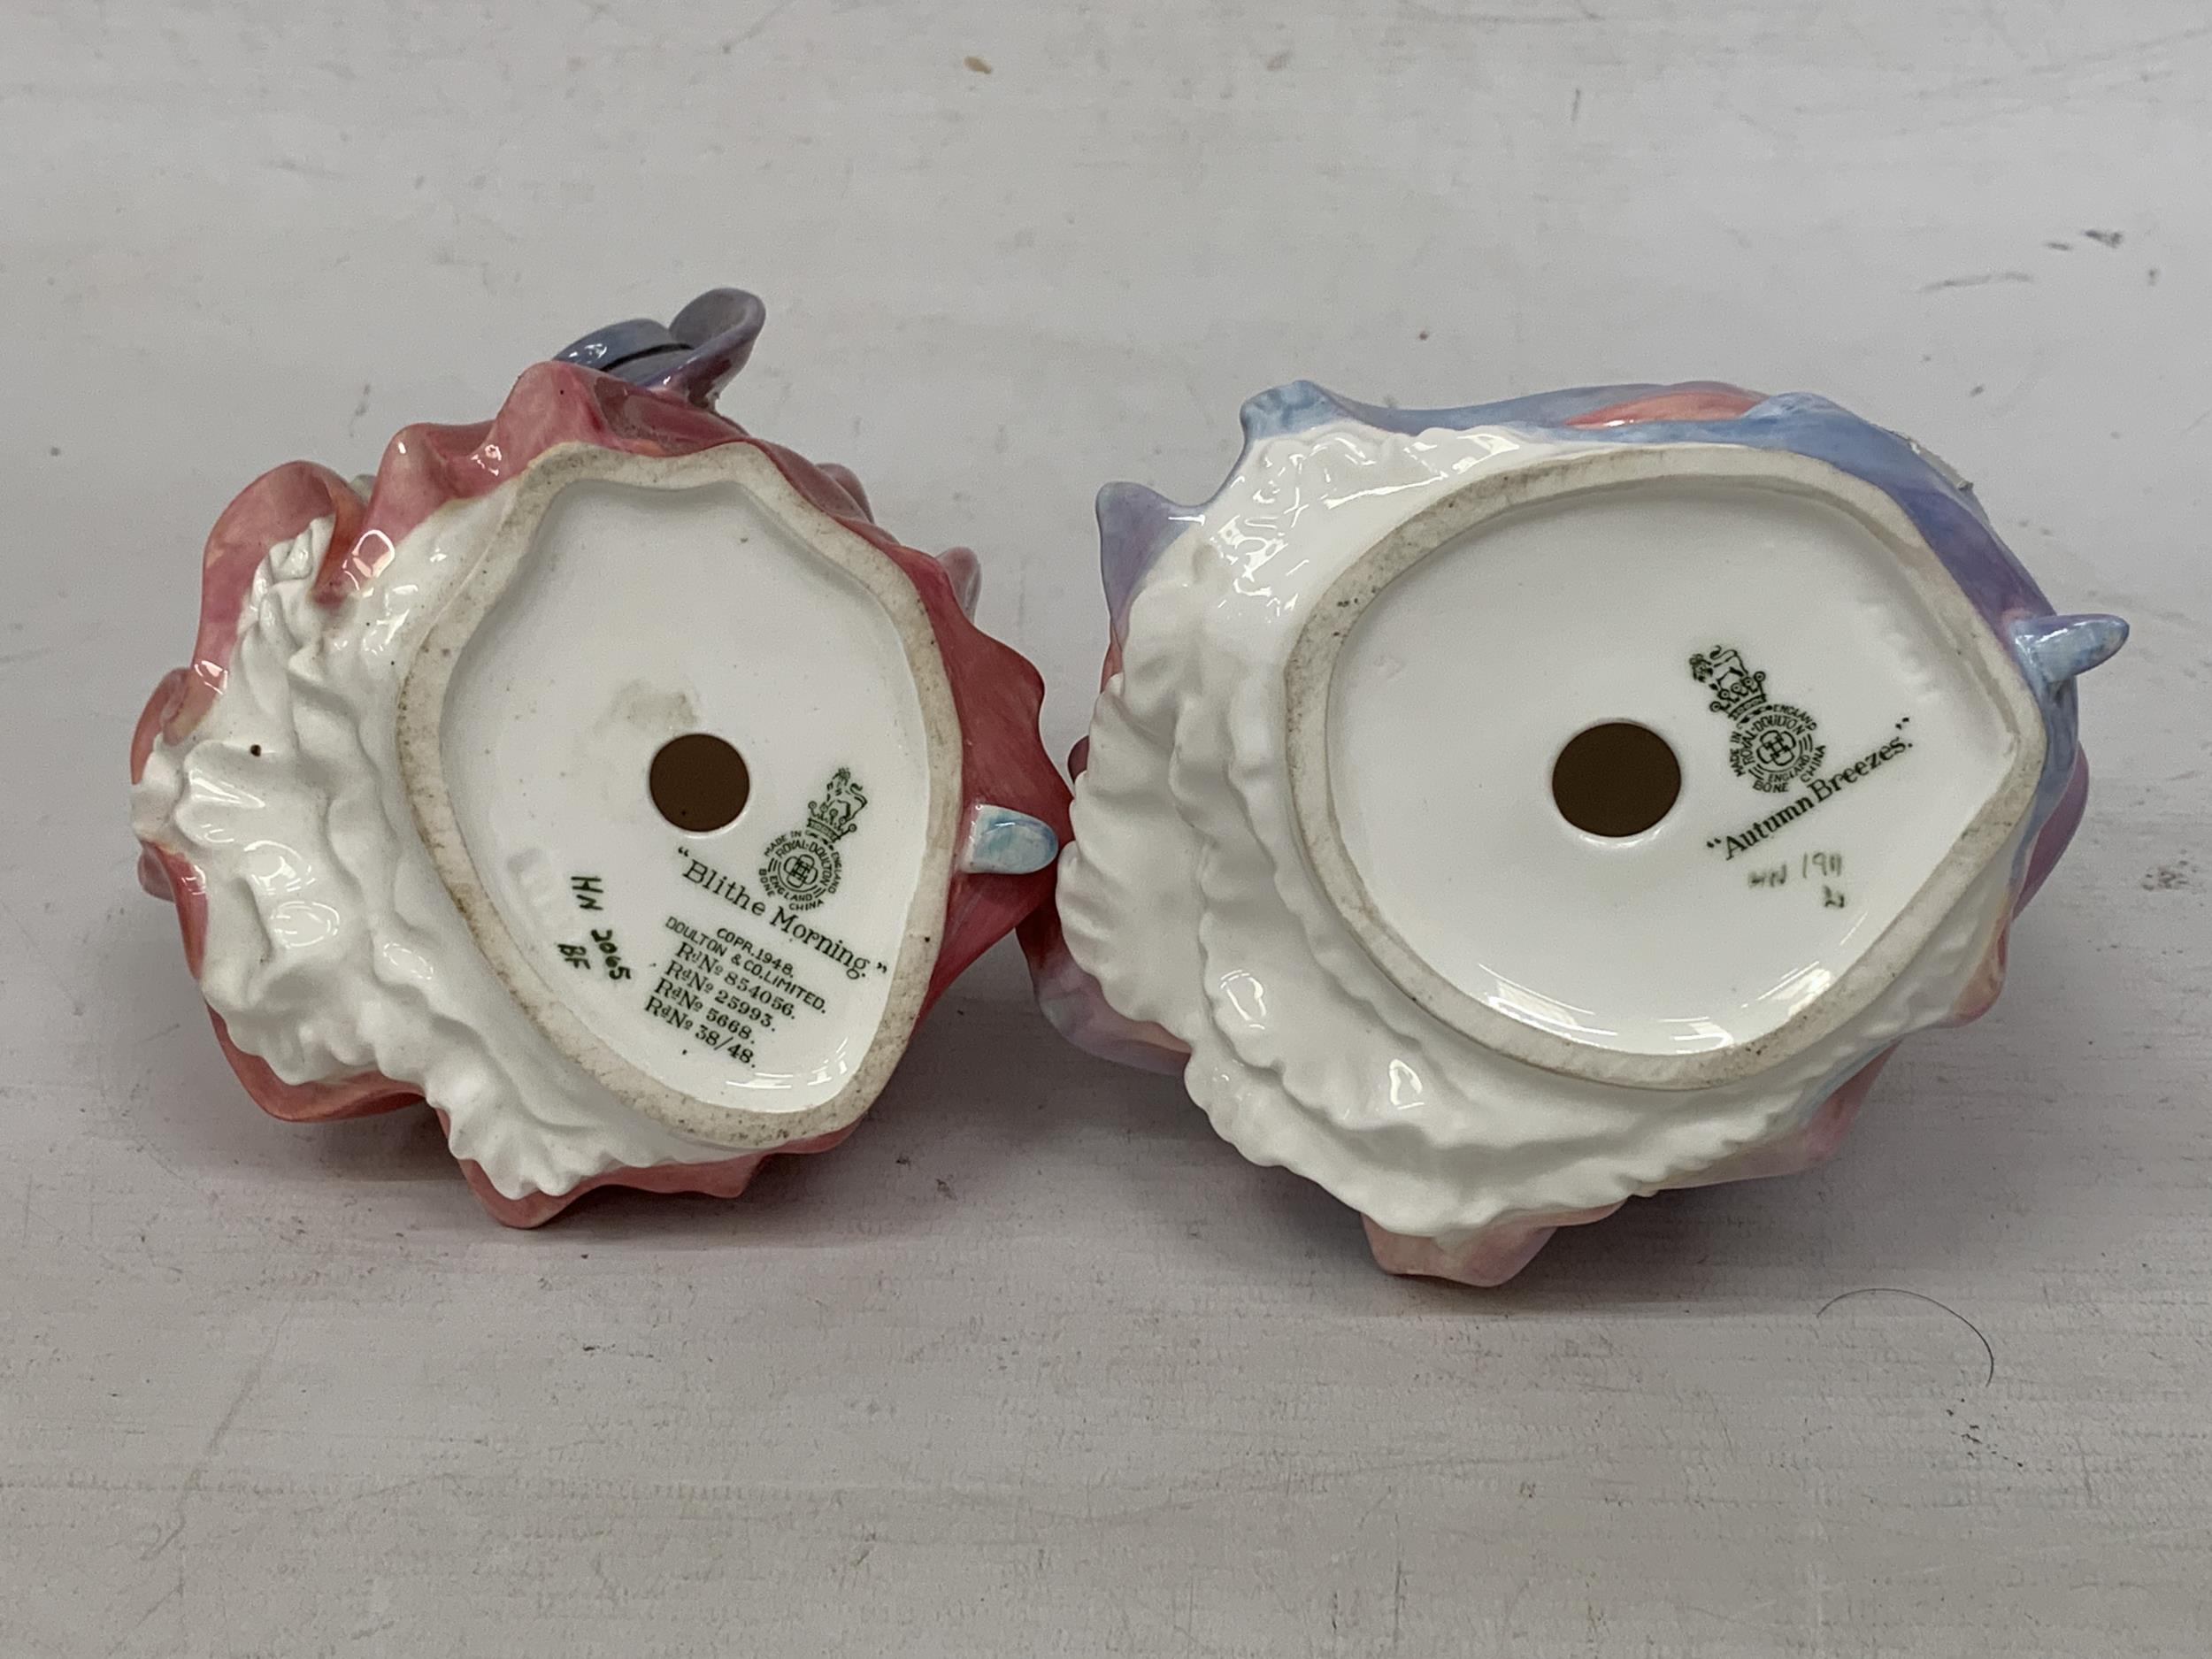 TWO ROYAL DOULTON FIGURINES "AUTUMN BREEZES" HN 1911 AND "BLITHE MORNING" HB 2045 - Image 5 of 5